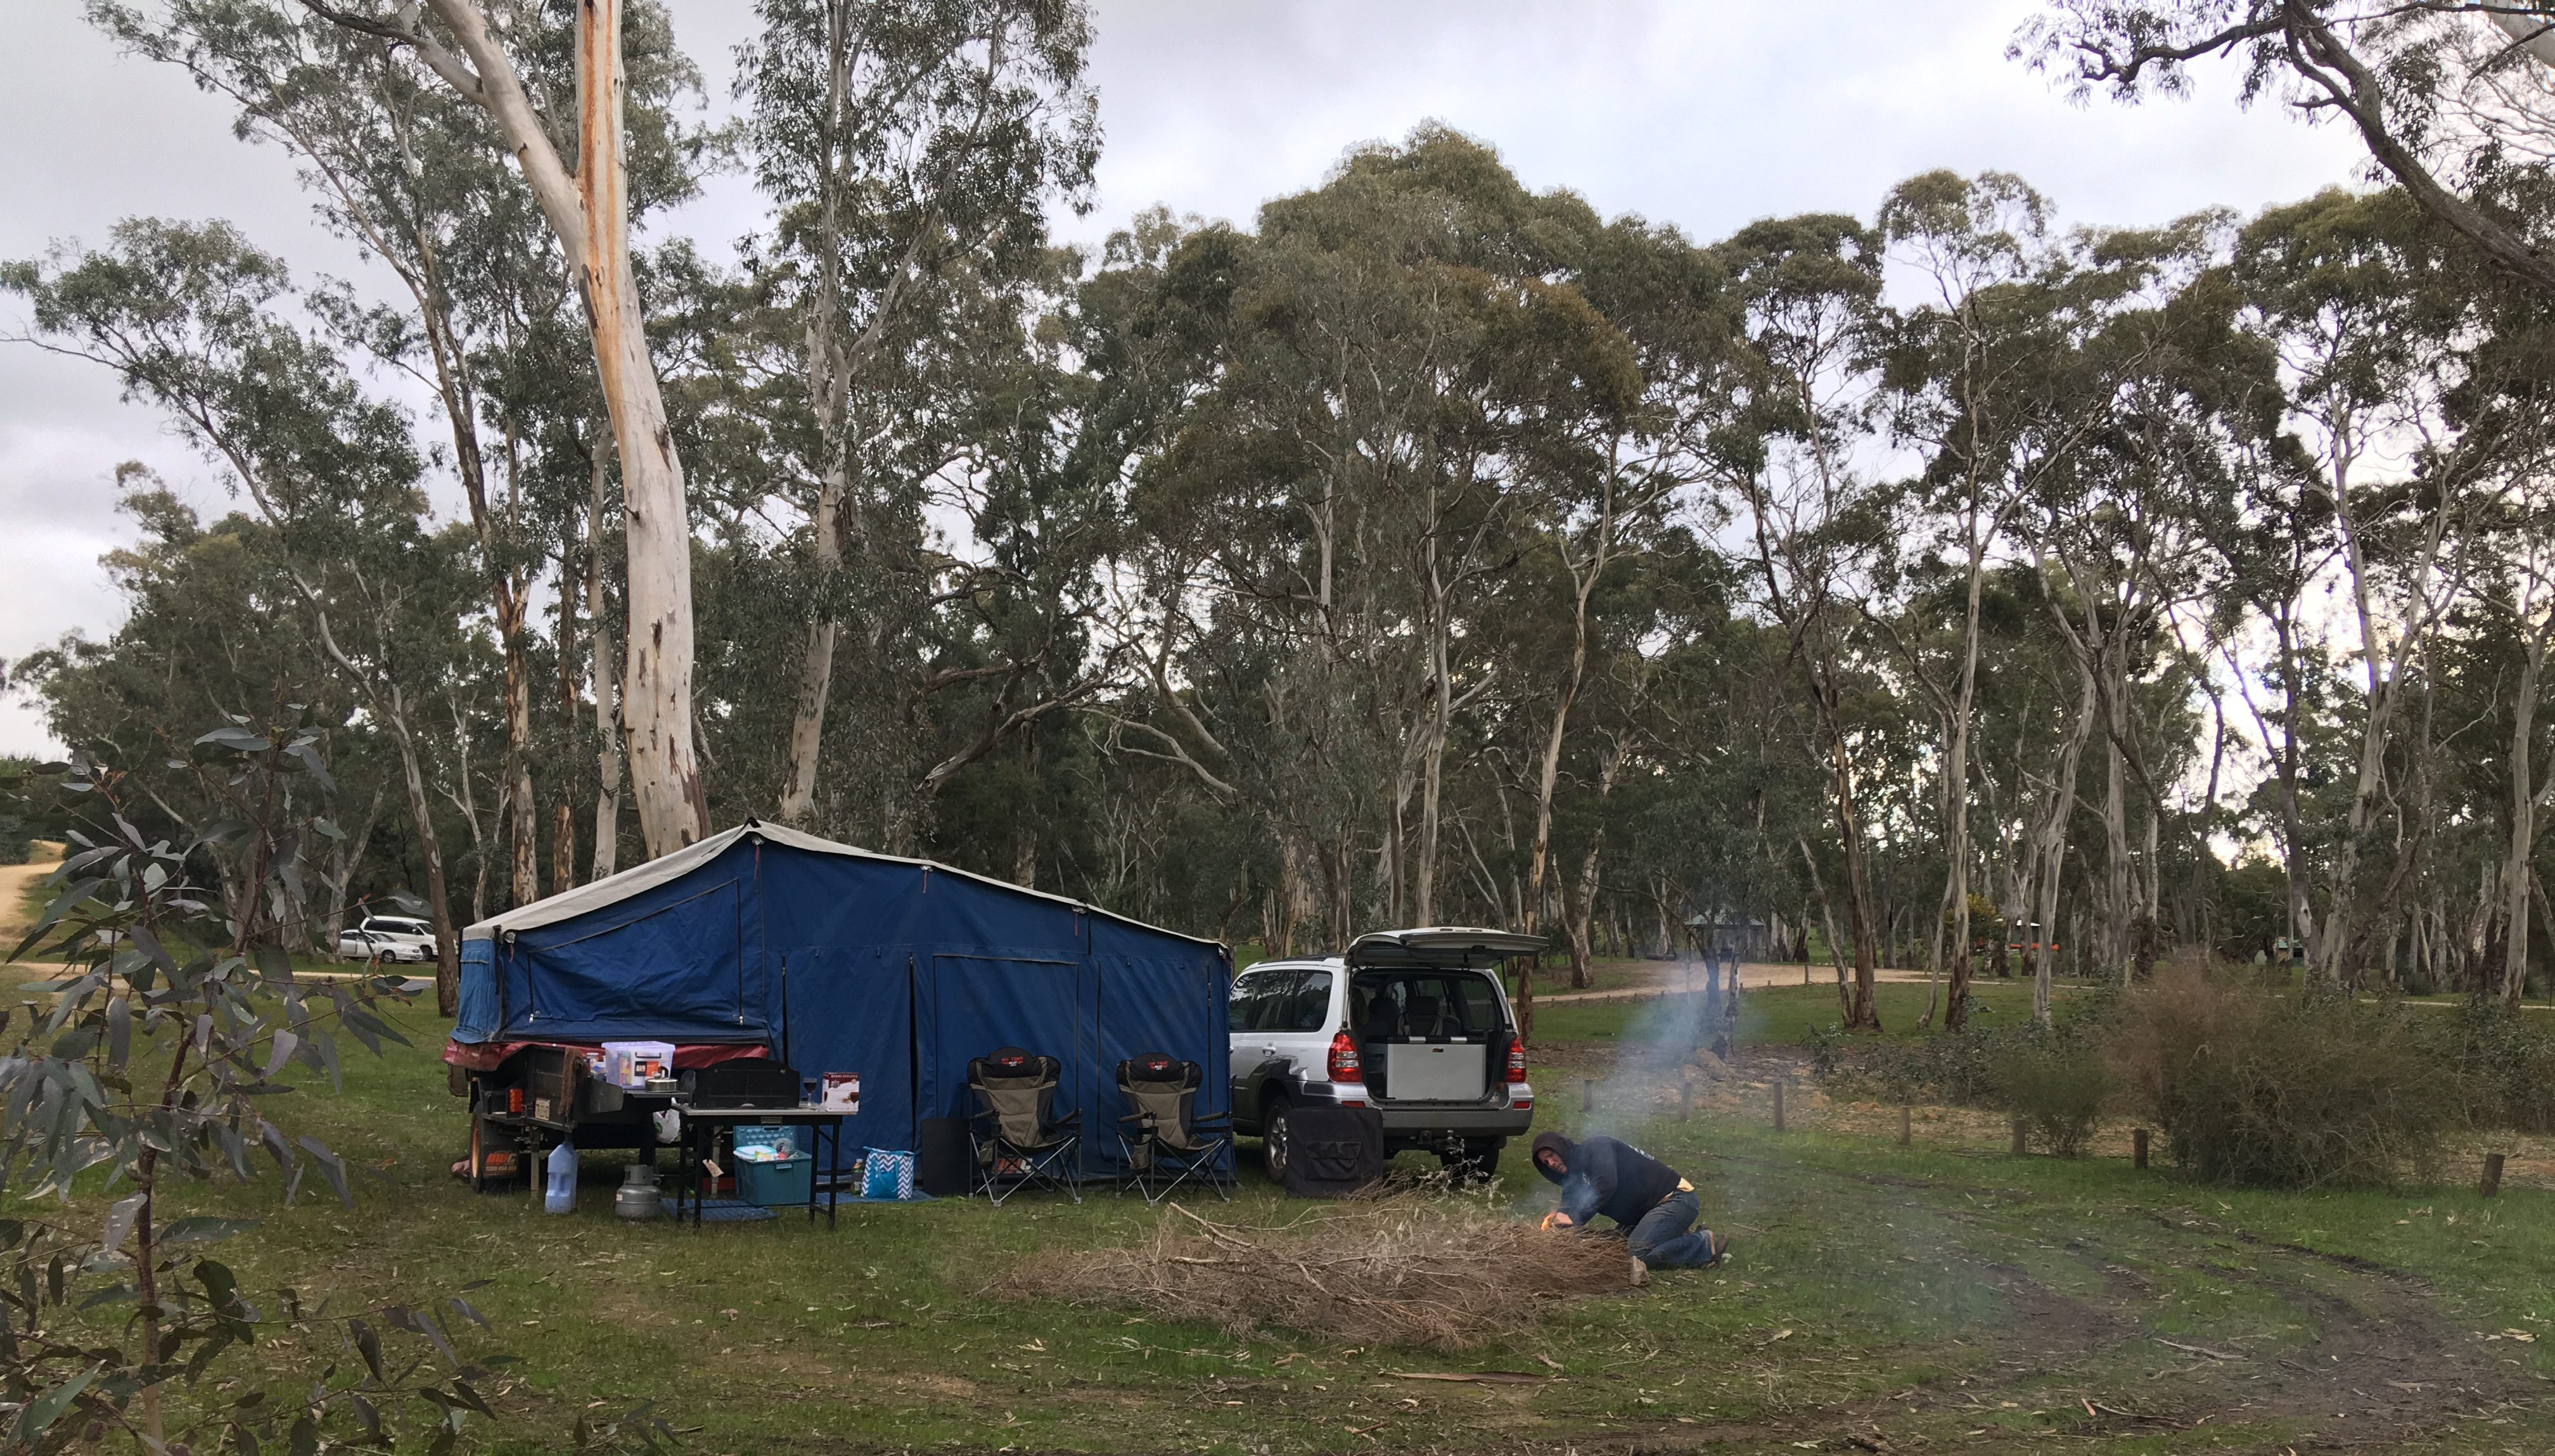 Ben & Michelle | Road Trip Around Australia | Do you want to know why we didn't free camp sooner? Lots of reasons... some of them excuses. But if we could do our time again we would be more self-sufficient (with a toilet and reliable power system) and less scaredy cats!